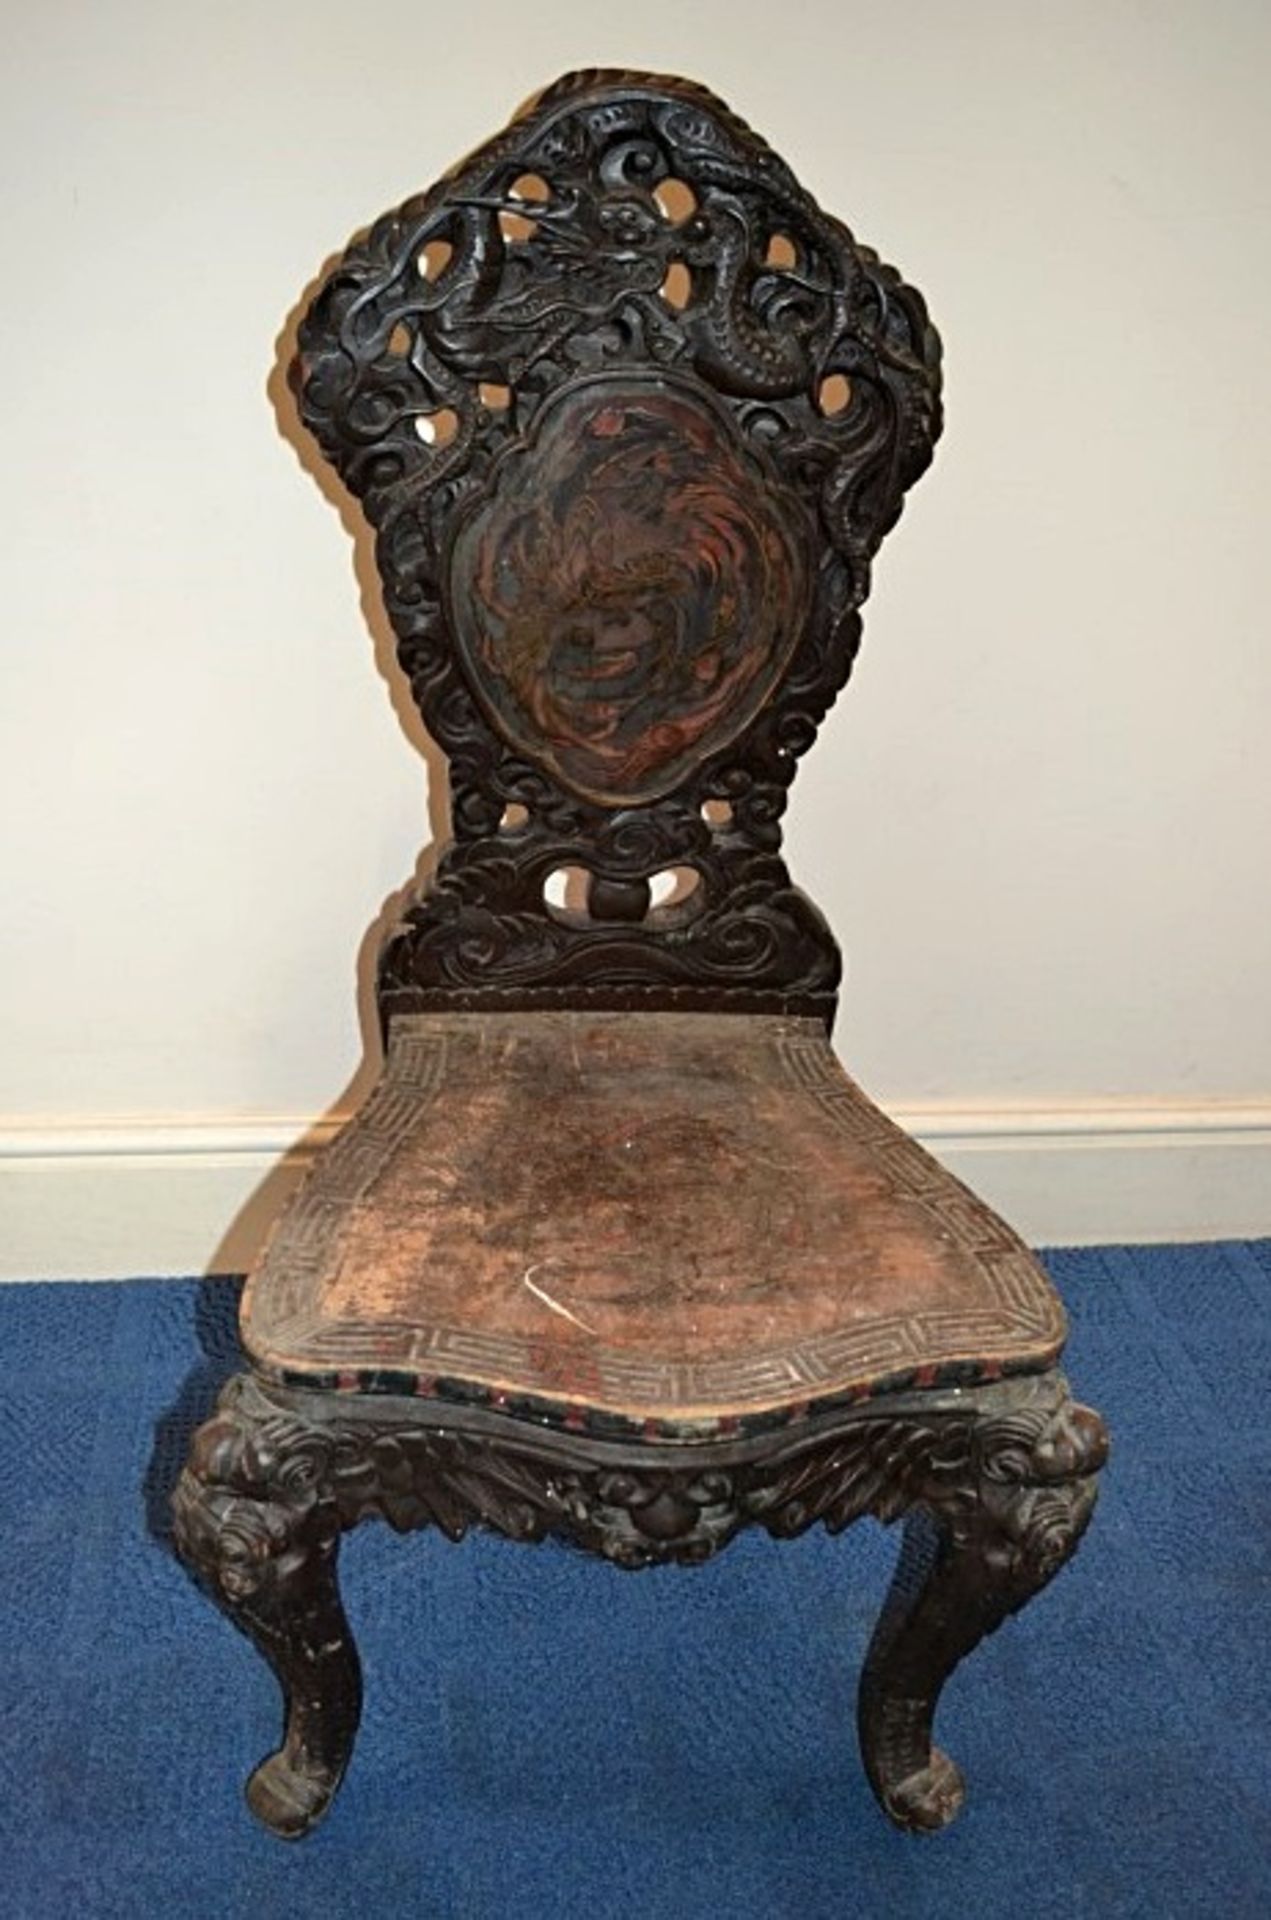 1 x Handcarved Antique Solid Wood Chinese Chair - Featuring Carved Dragons And Inlayed Design On